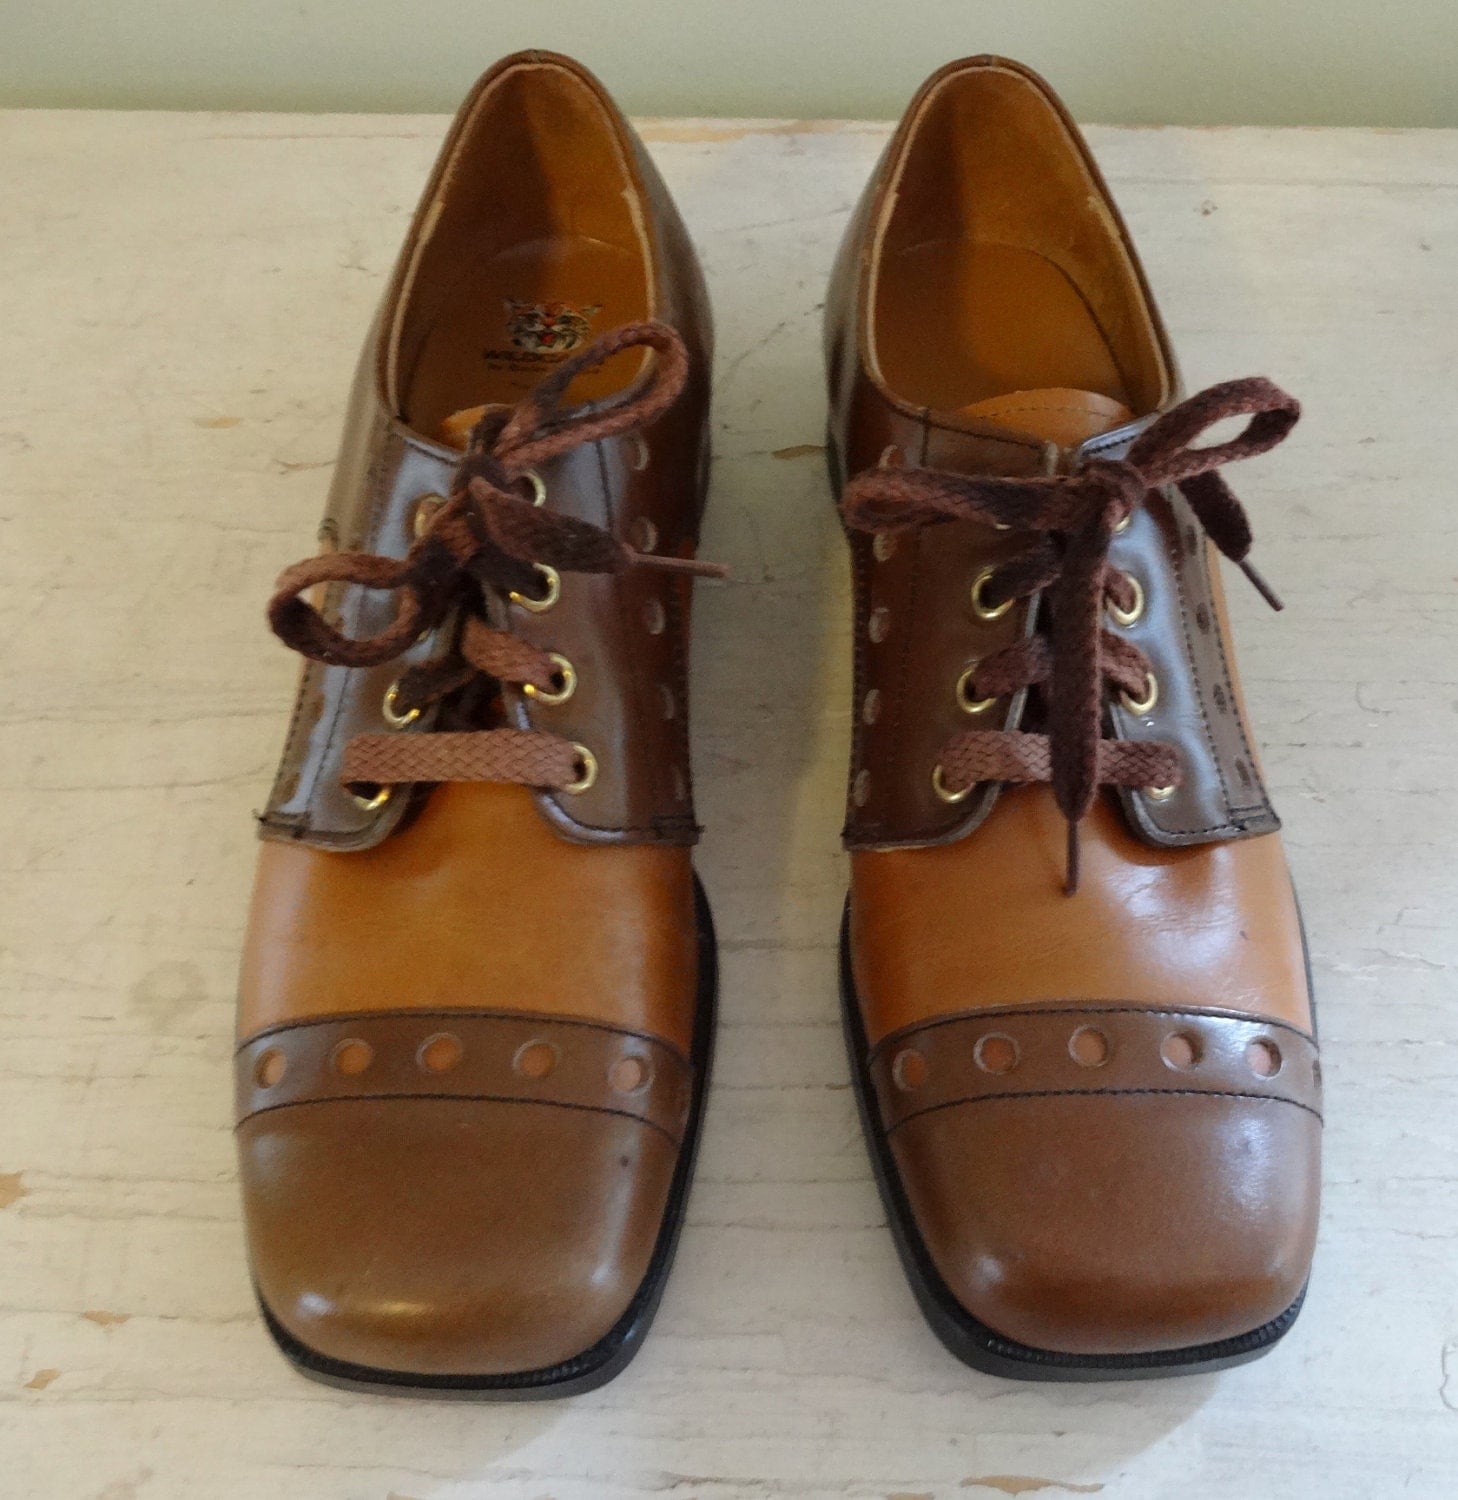 Vintage Buster Brown Shoes / 1970s Brown Oxfords / 70s Lace Up